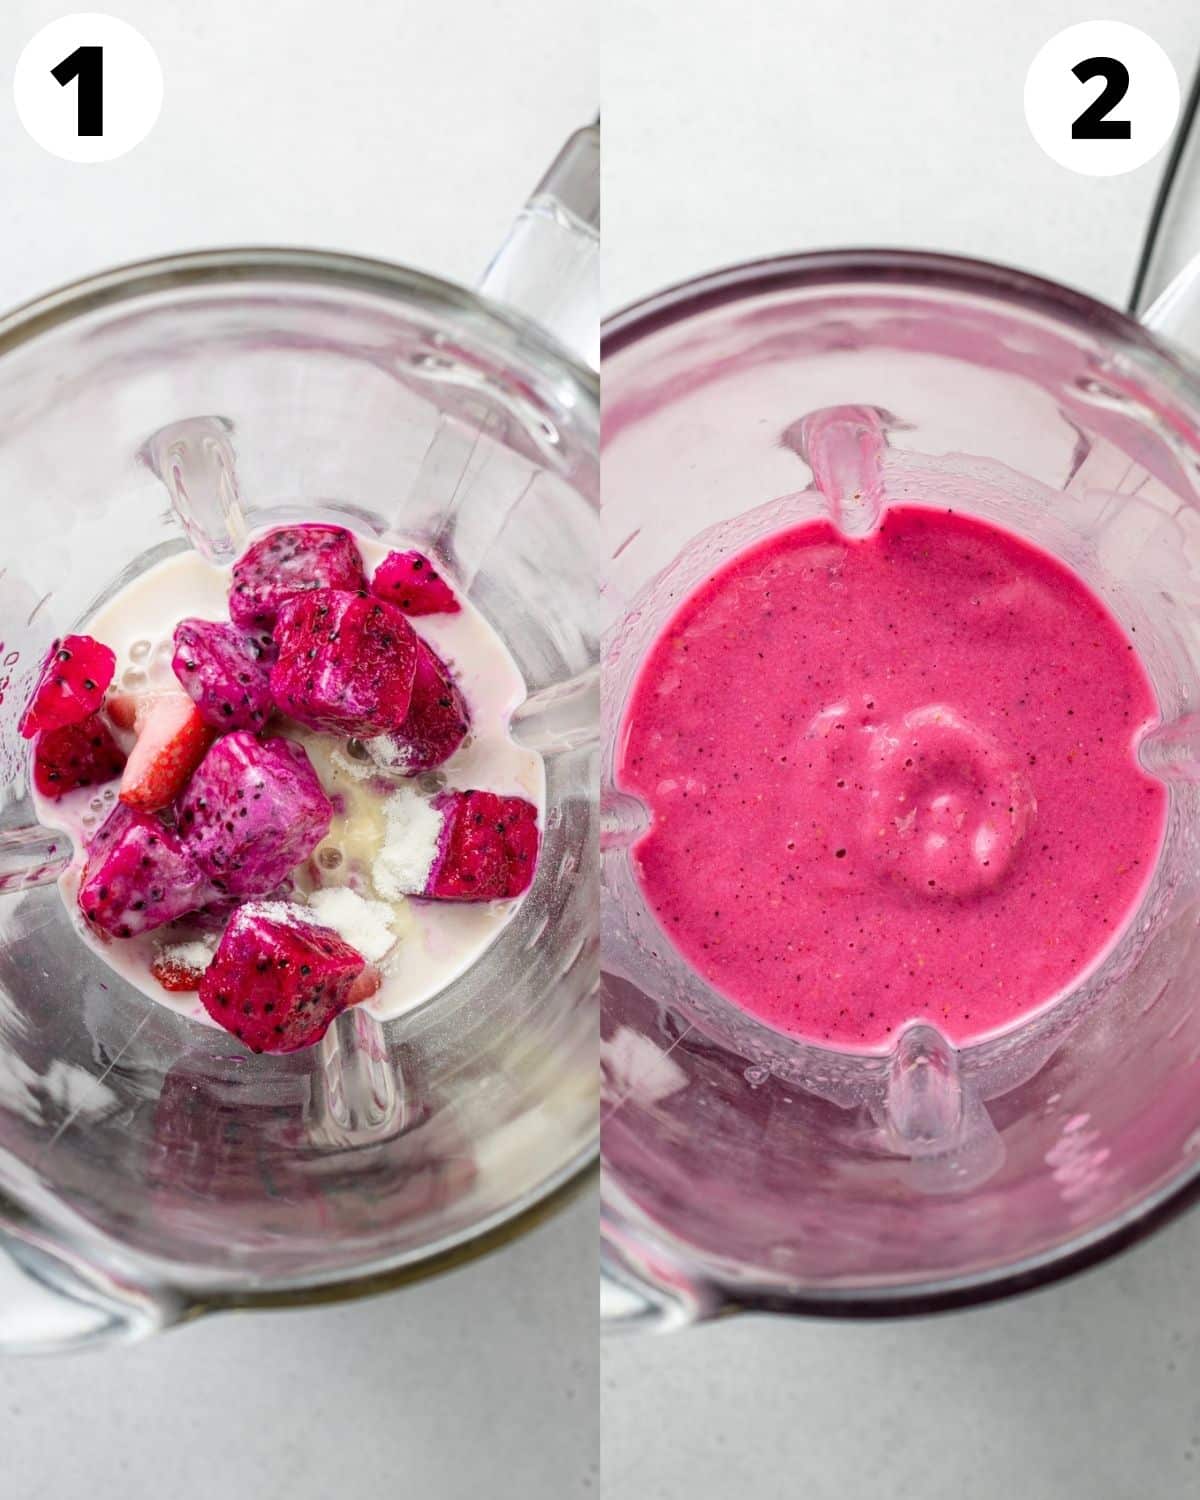 Dragon fruit strawberry smoothie 2 step process pictured